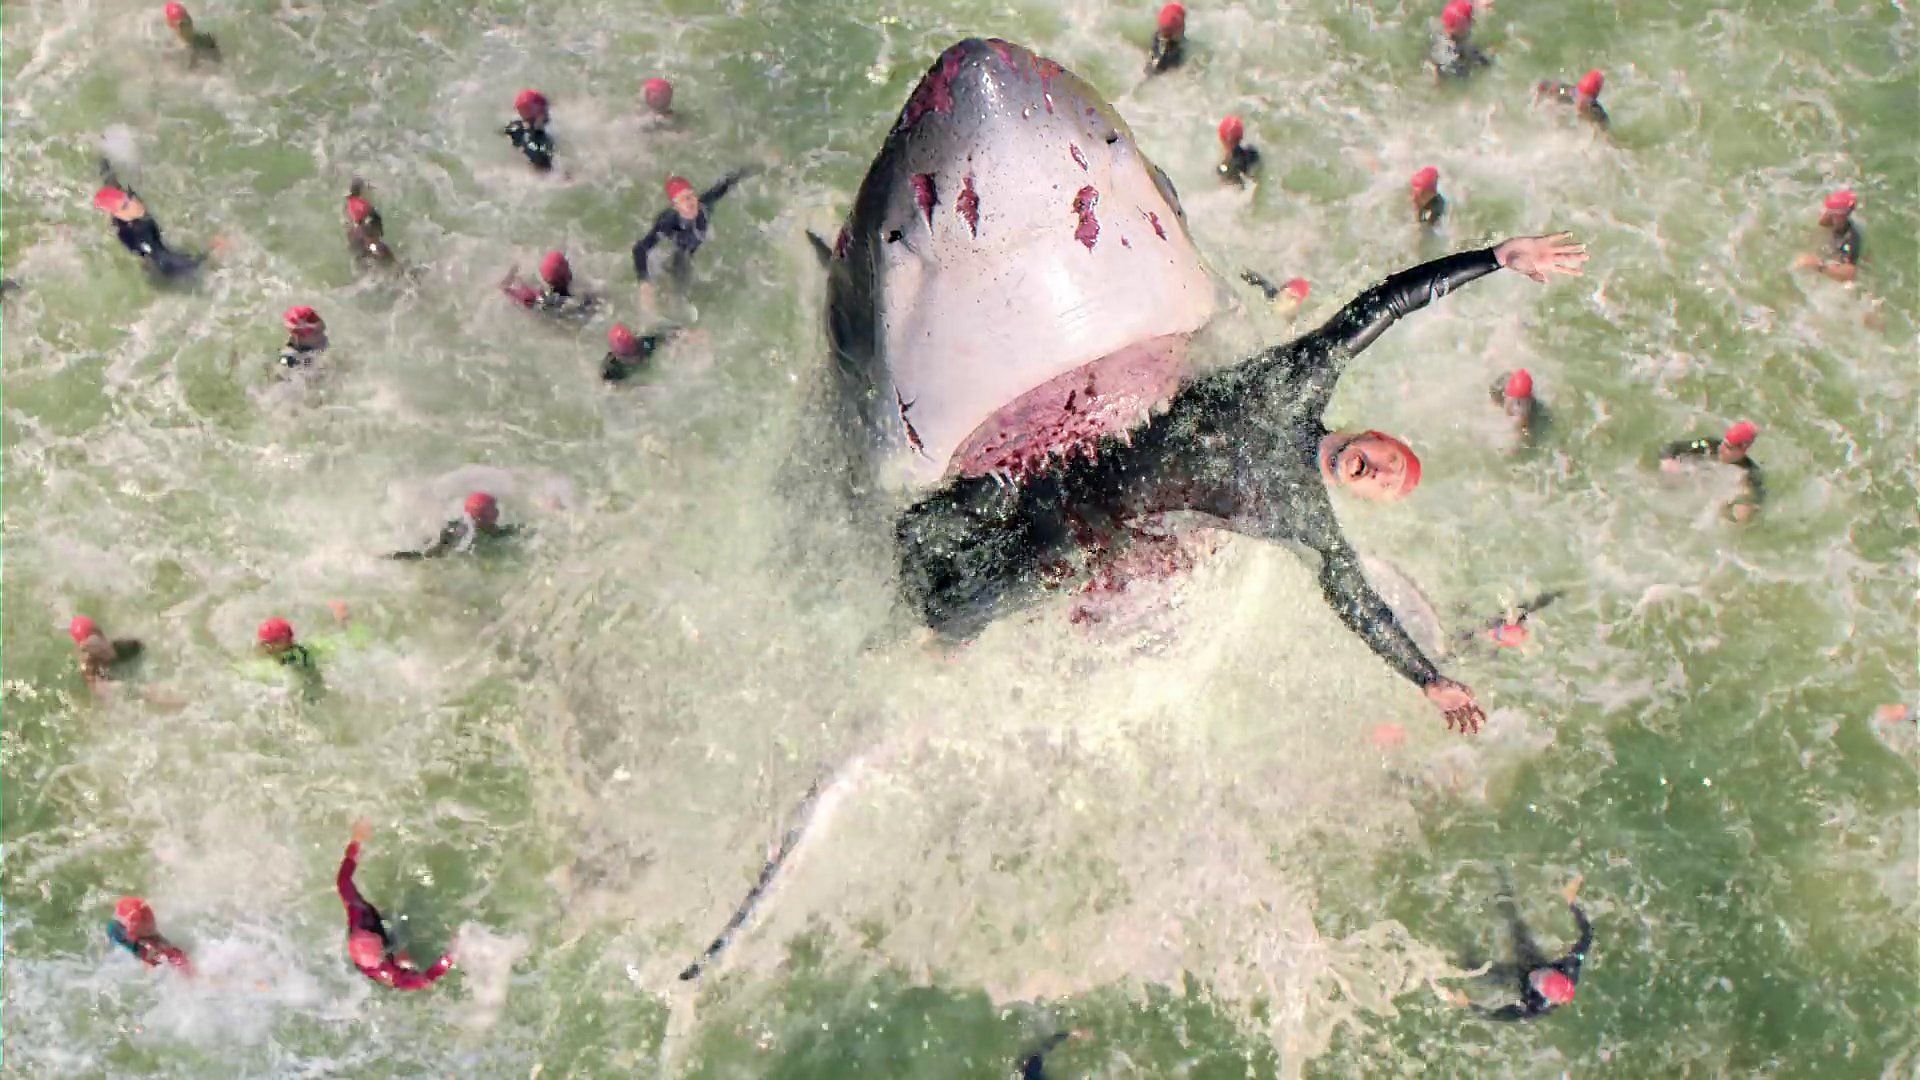 Under Paris showcases a great white shark attacking swimmers in Paris, but that remains fictional. (Image via Netflix)